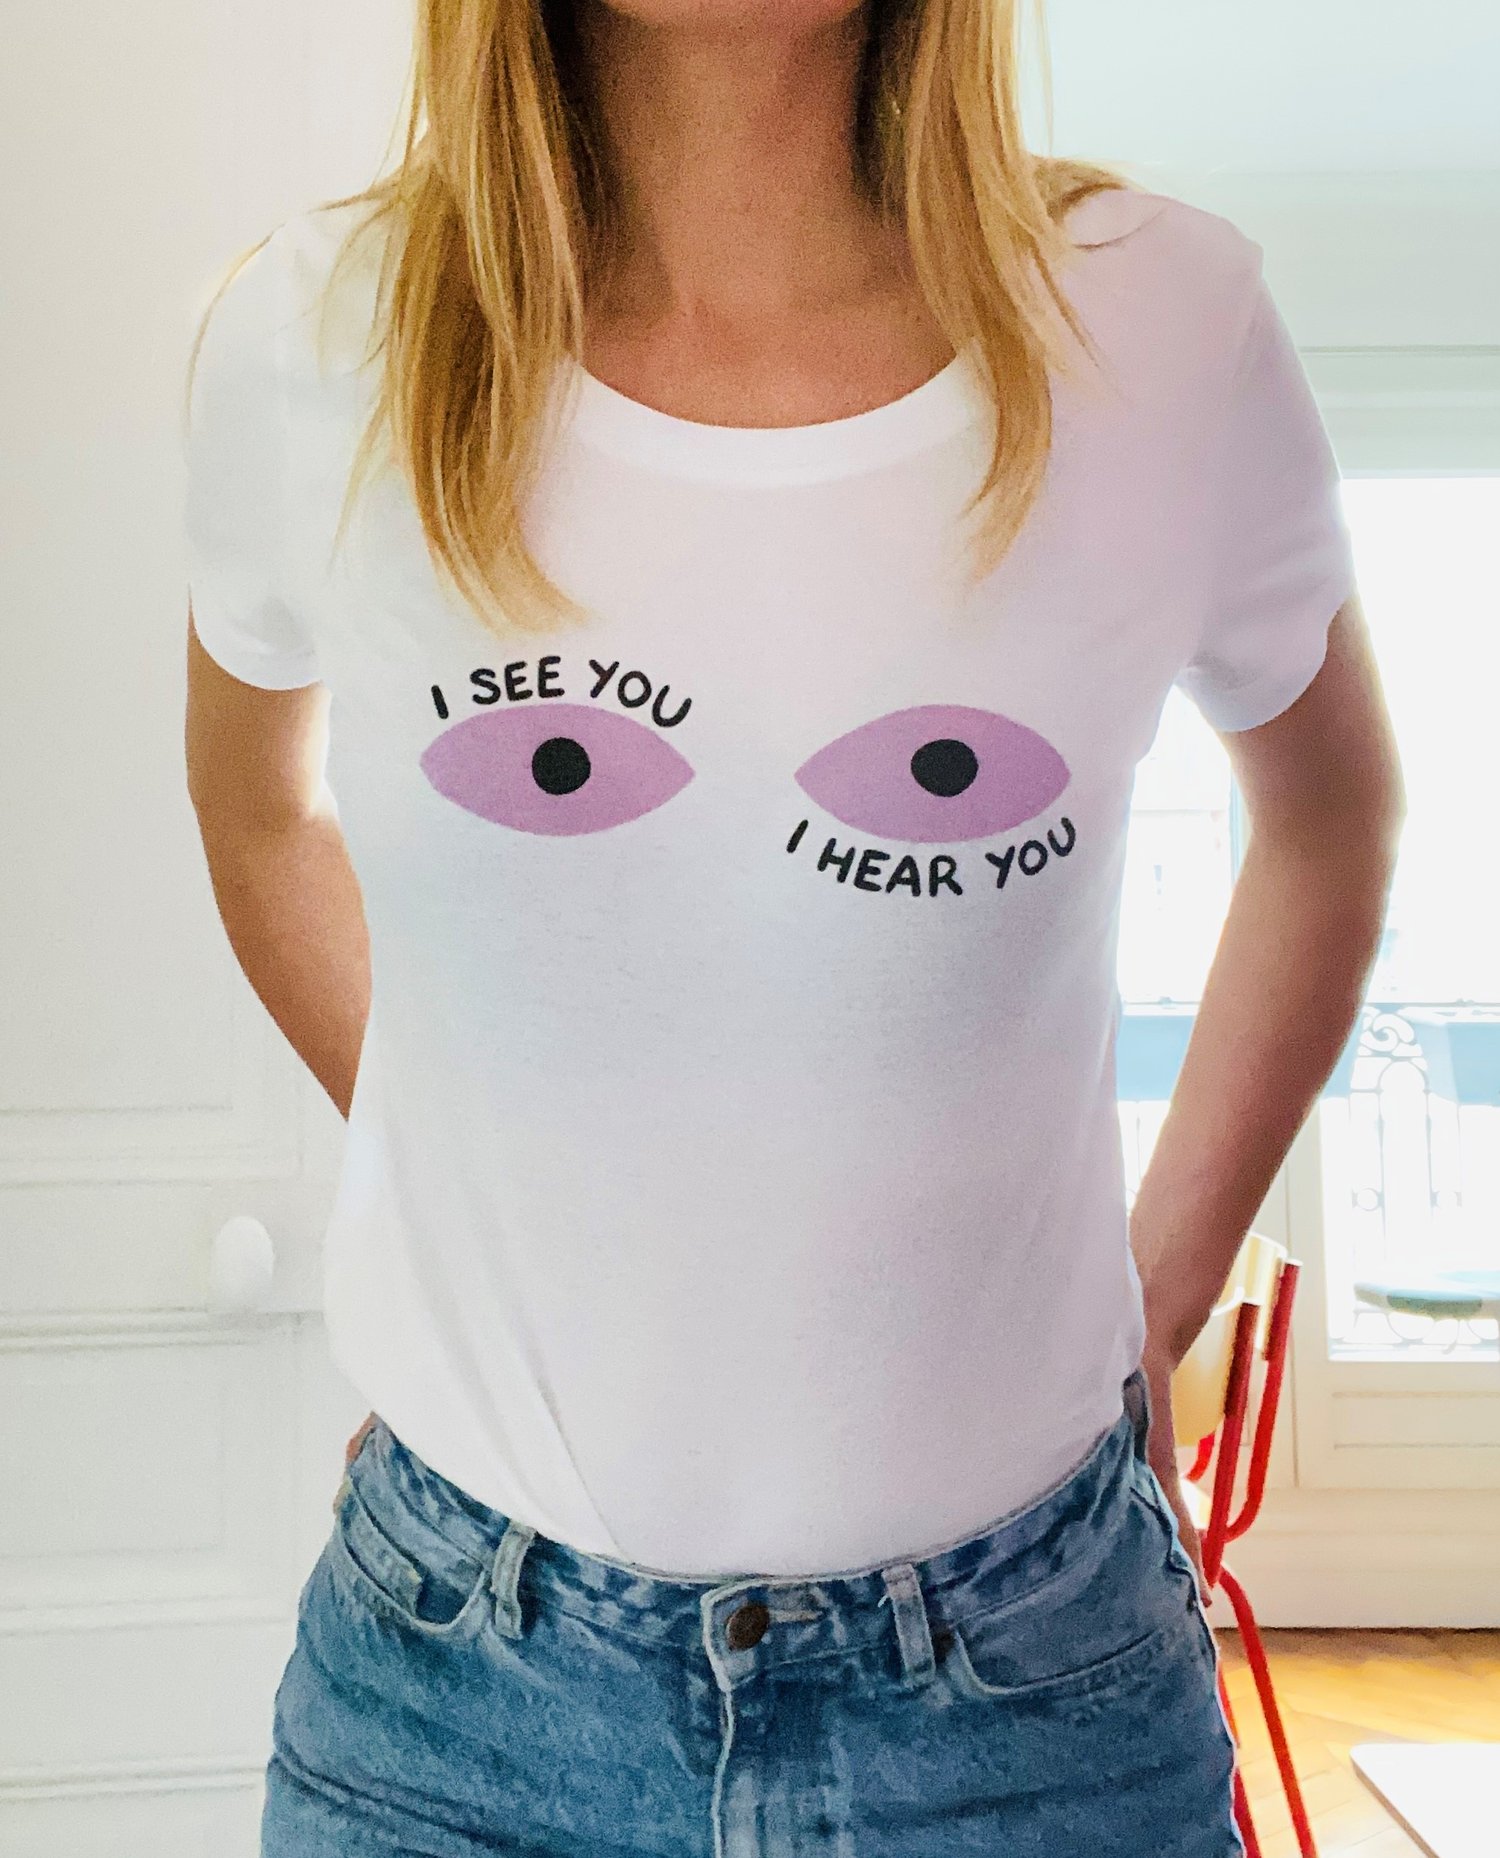 Image of Collab terminée - THE SIMONES X TIFFANY COOPER - Tee-Shirt blanc "I SEE YOU"